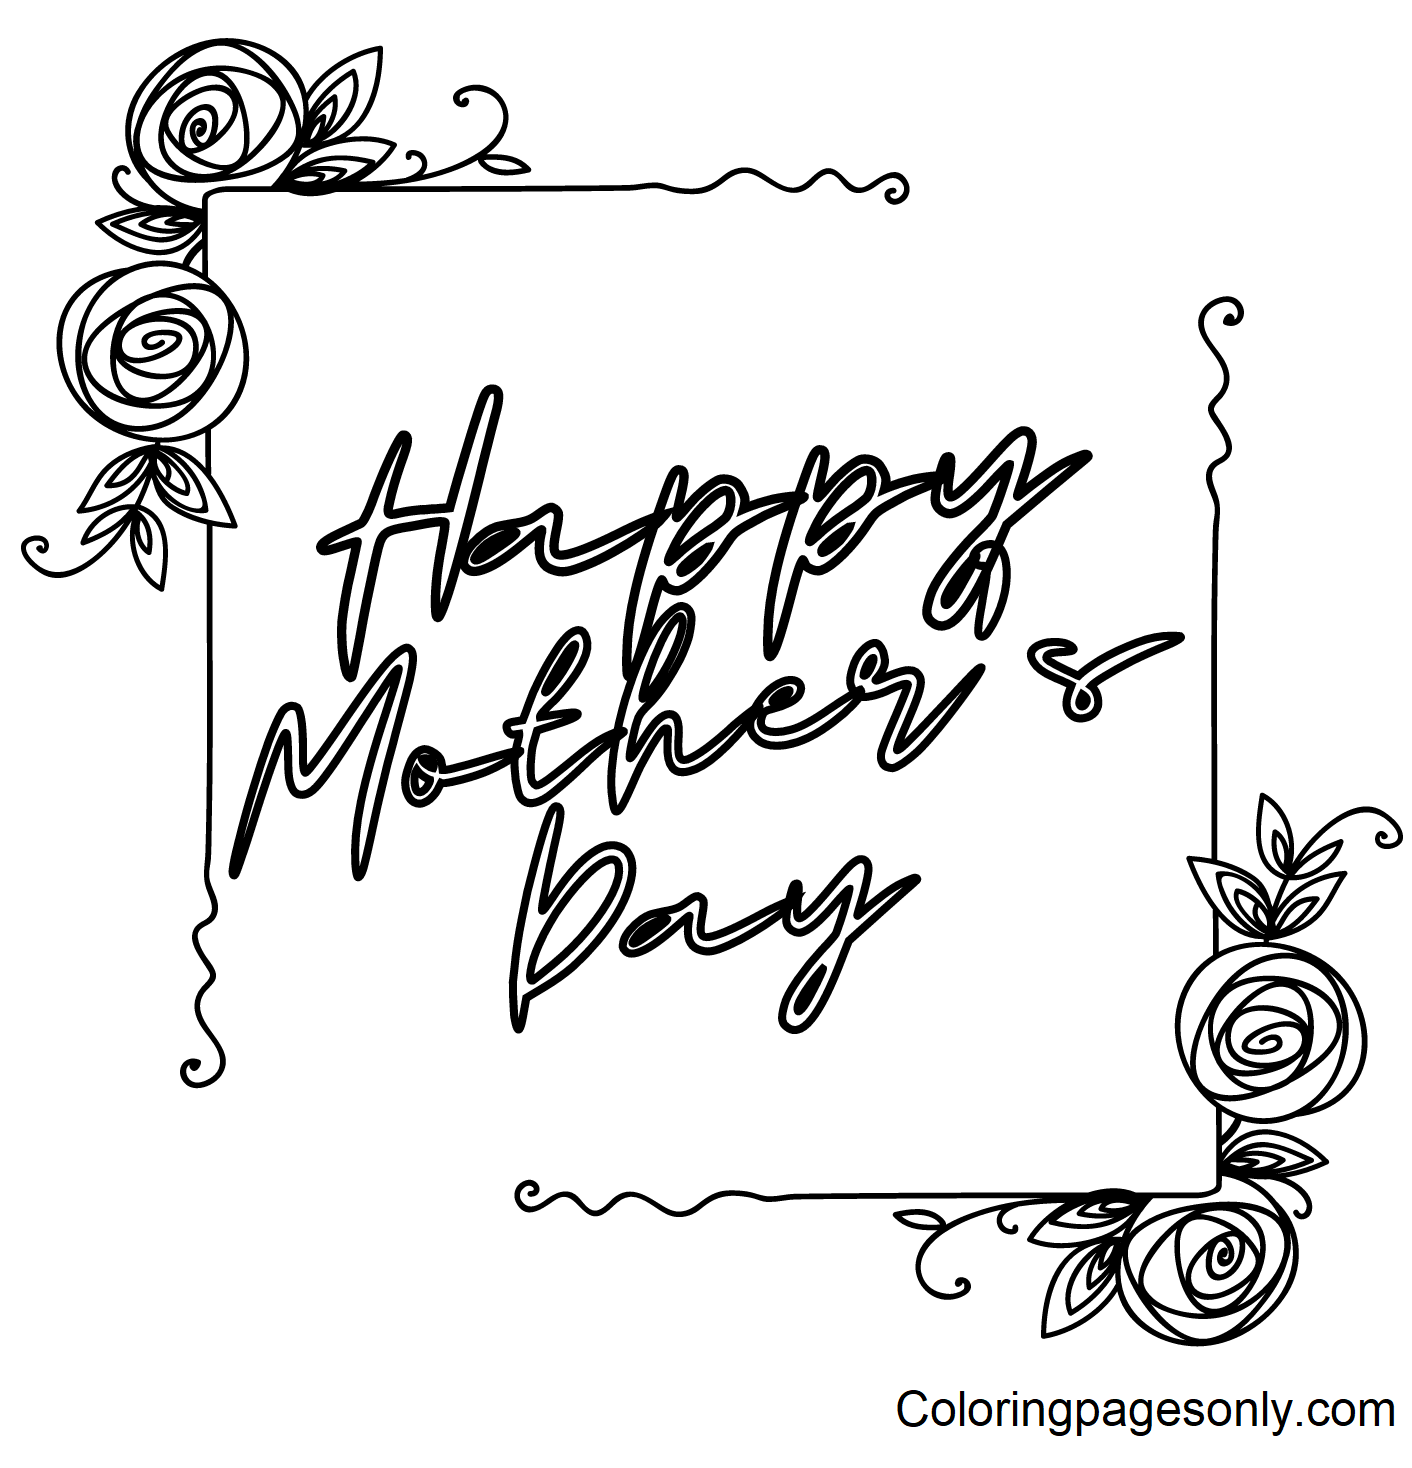 Happy Mothers Day Pictures to Print Coloring Pages